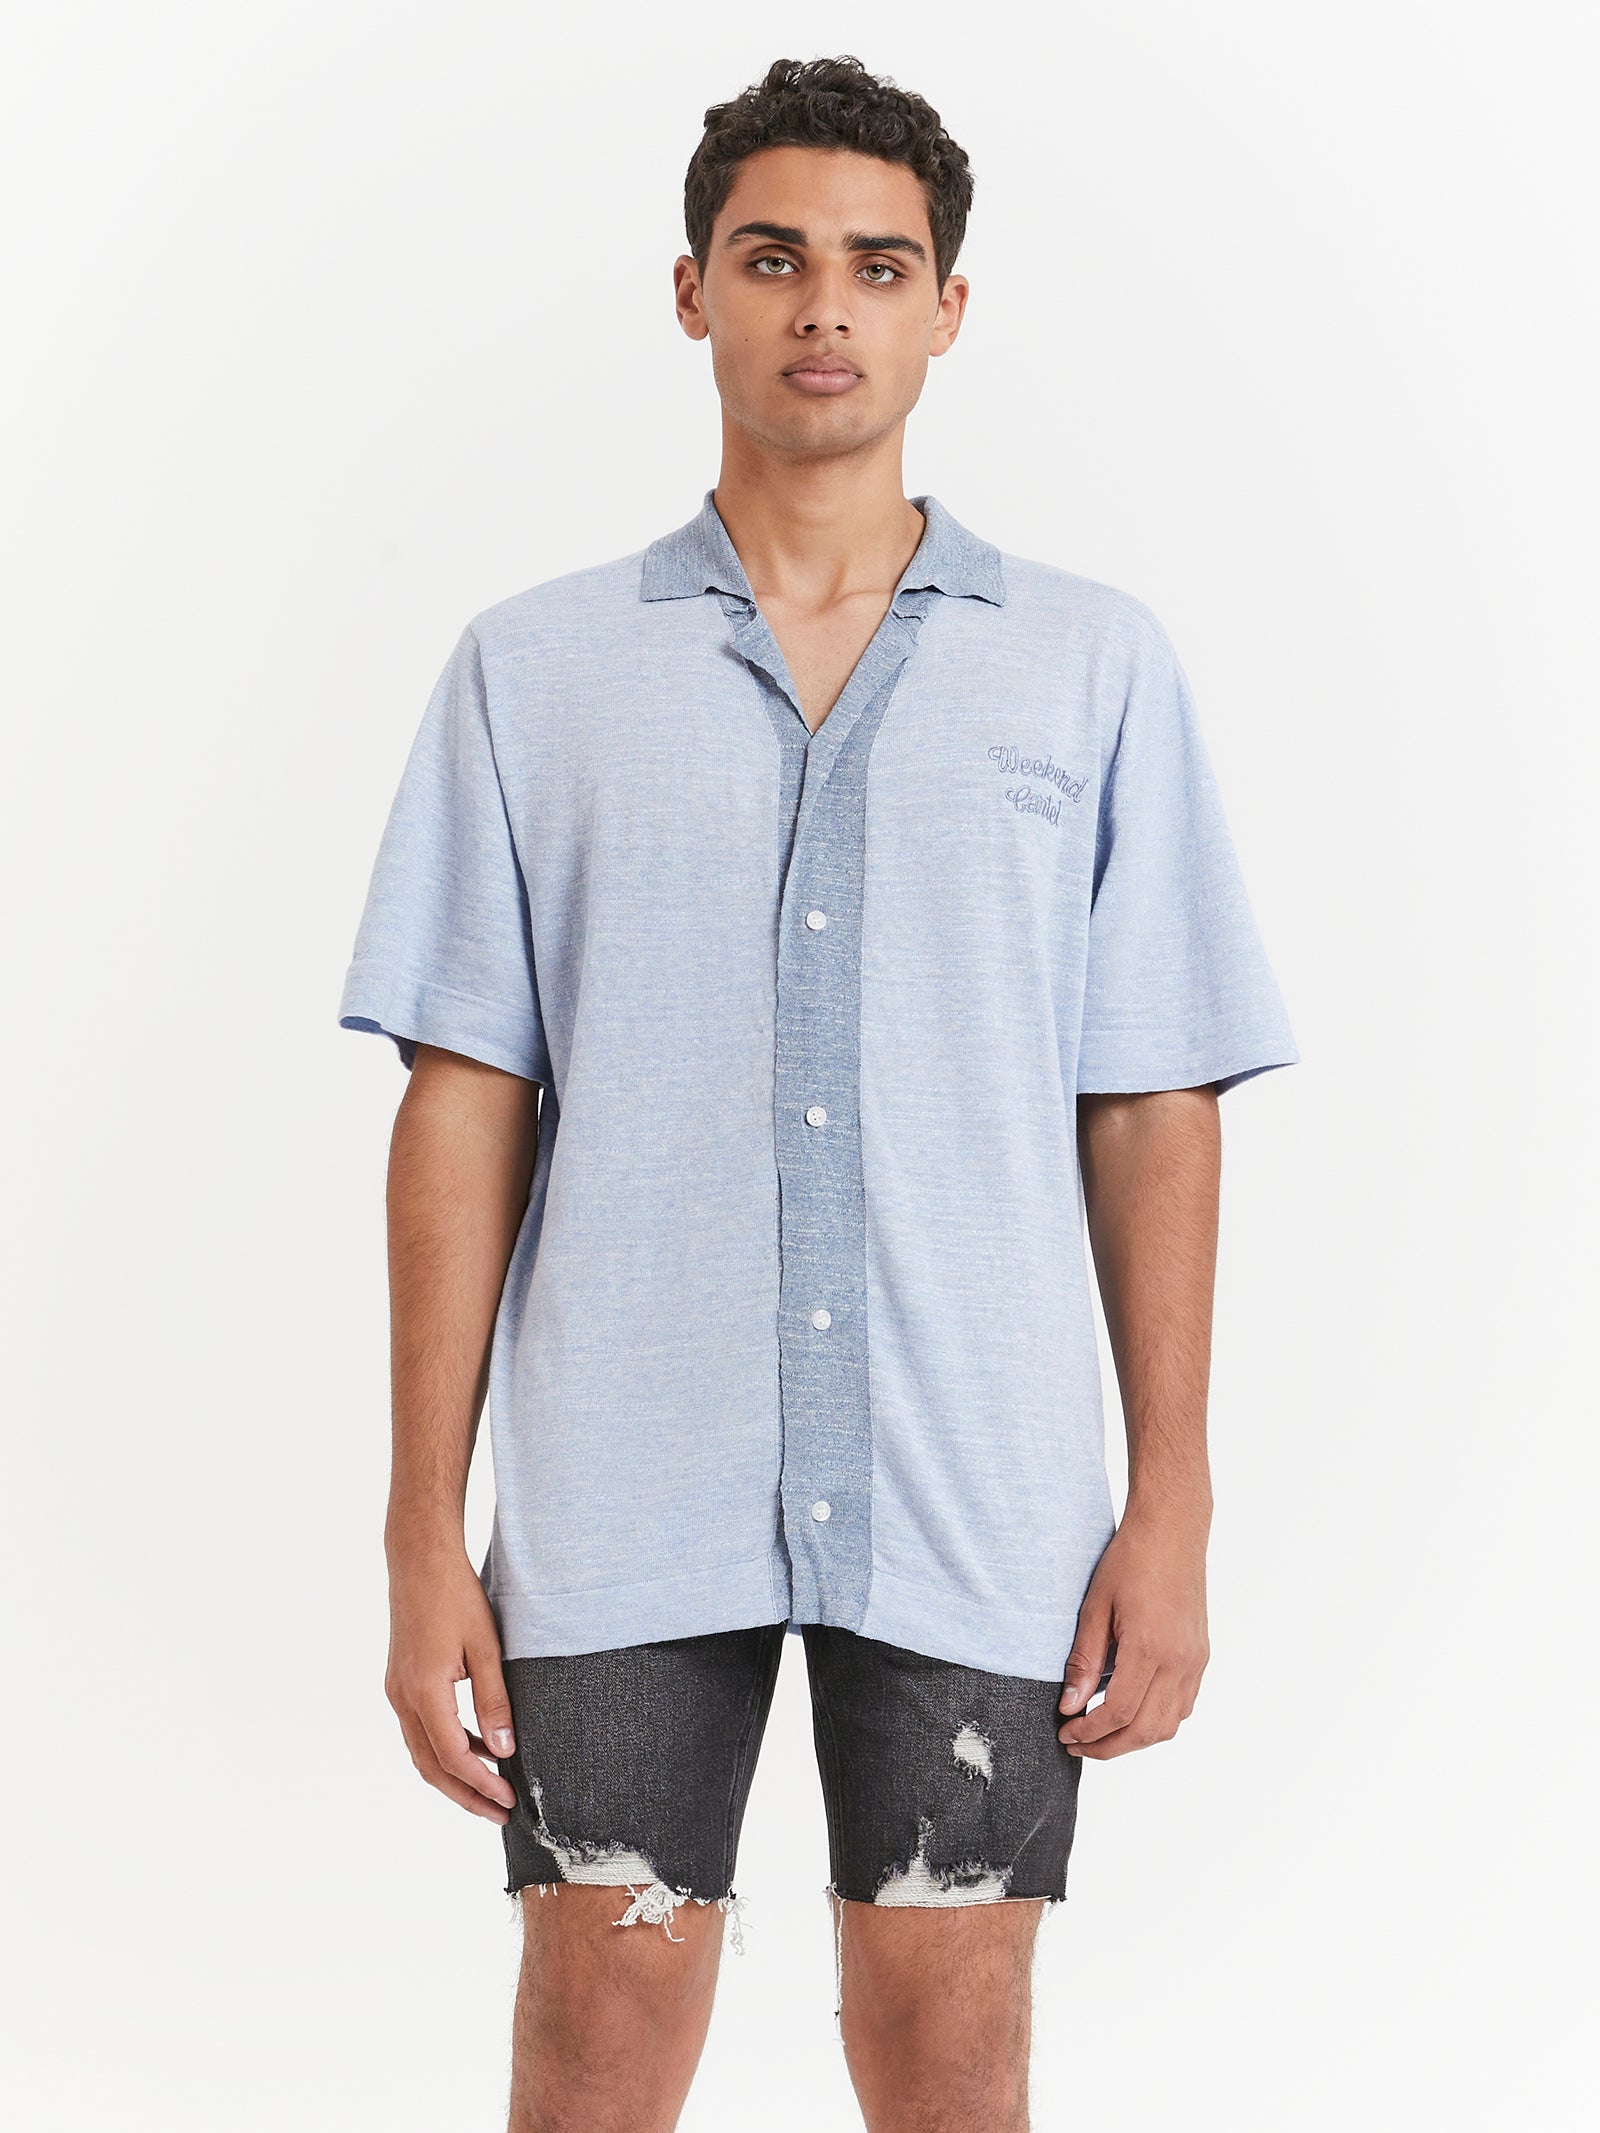 Saloon Knit Shirt in Baby Blue